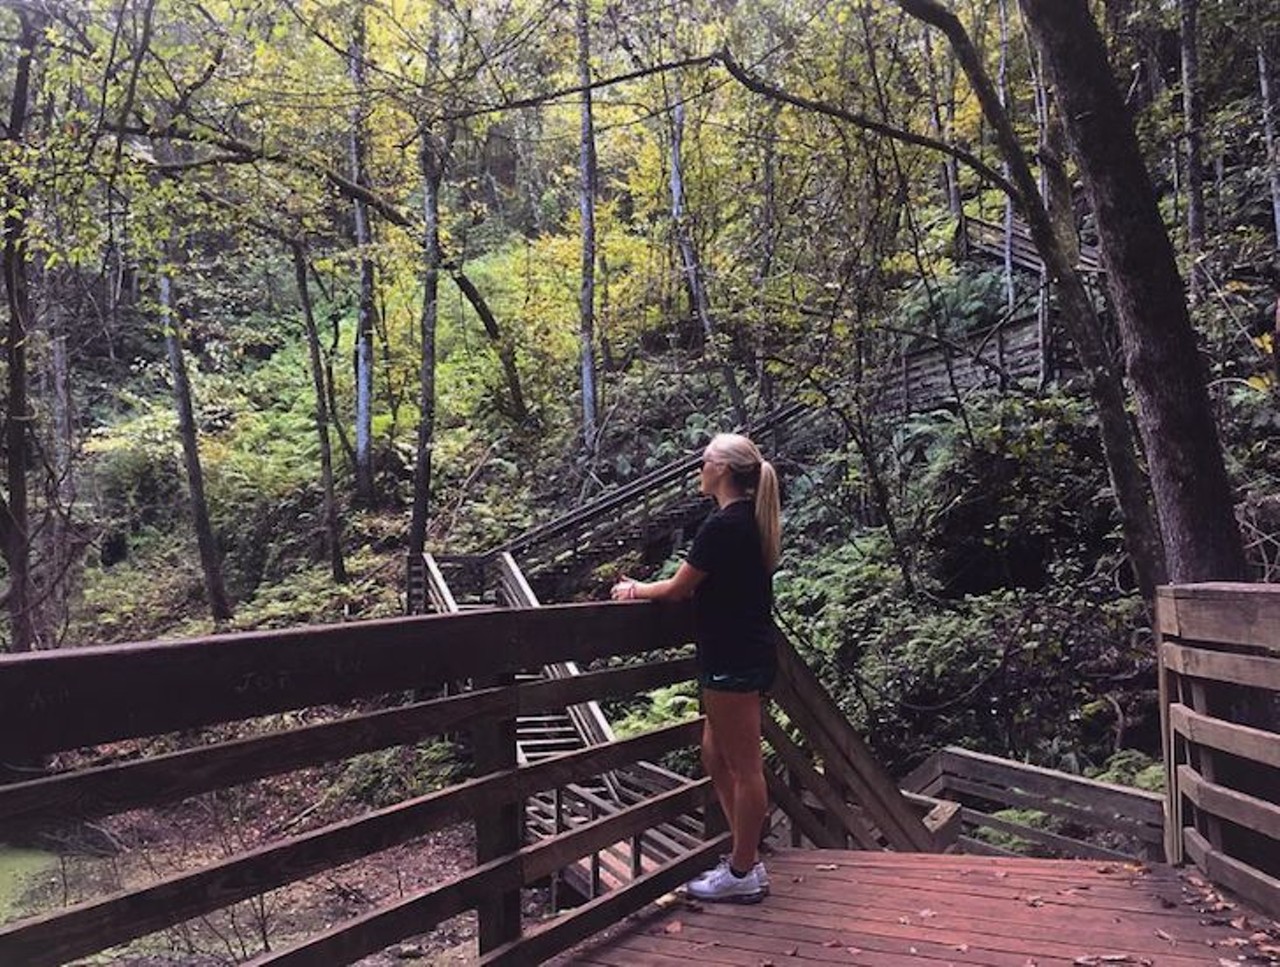 Devil's Millhopper Geological State Park
4732 Millhopper Road, Gainesville, (352) 955-2008
Follow the stairs 120-feet down into one of Florida's oldest limestone sinkholes and search for the fossilized treasures researchers have been finding in this park for decades.
Photo via jennnnhall/Instagram